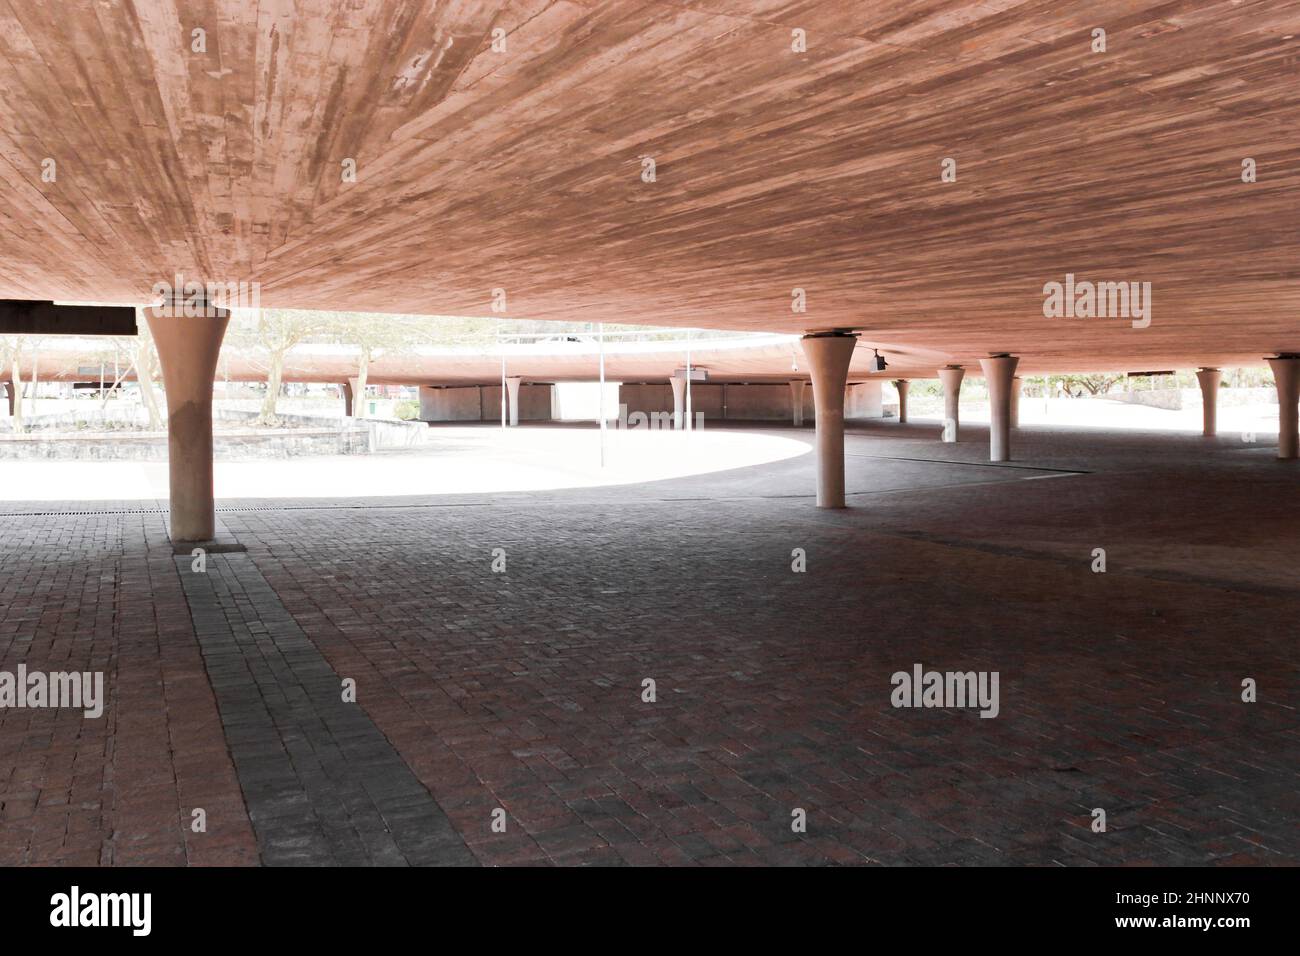 Under the Granger Bay Blvd roundabout at Cape Town Stadium. Stock Photo